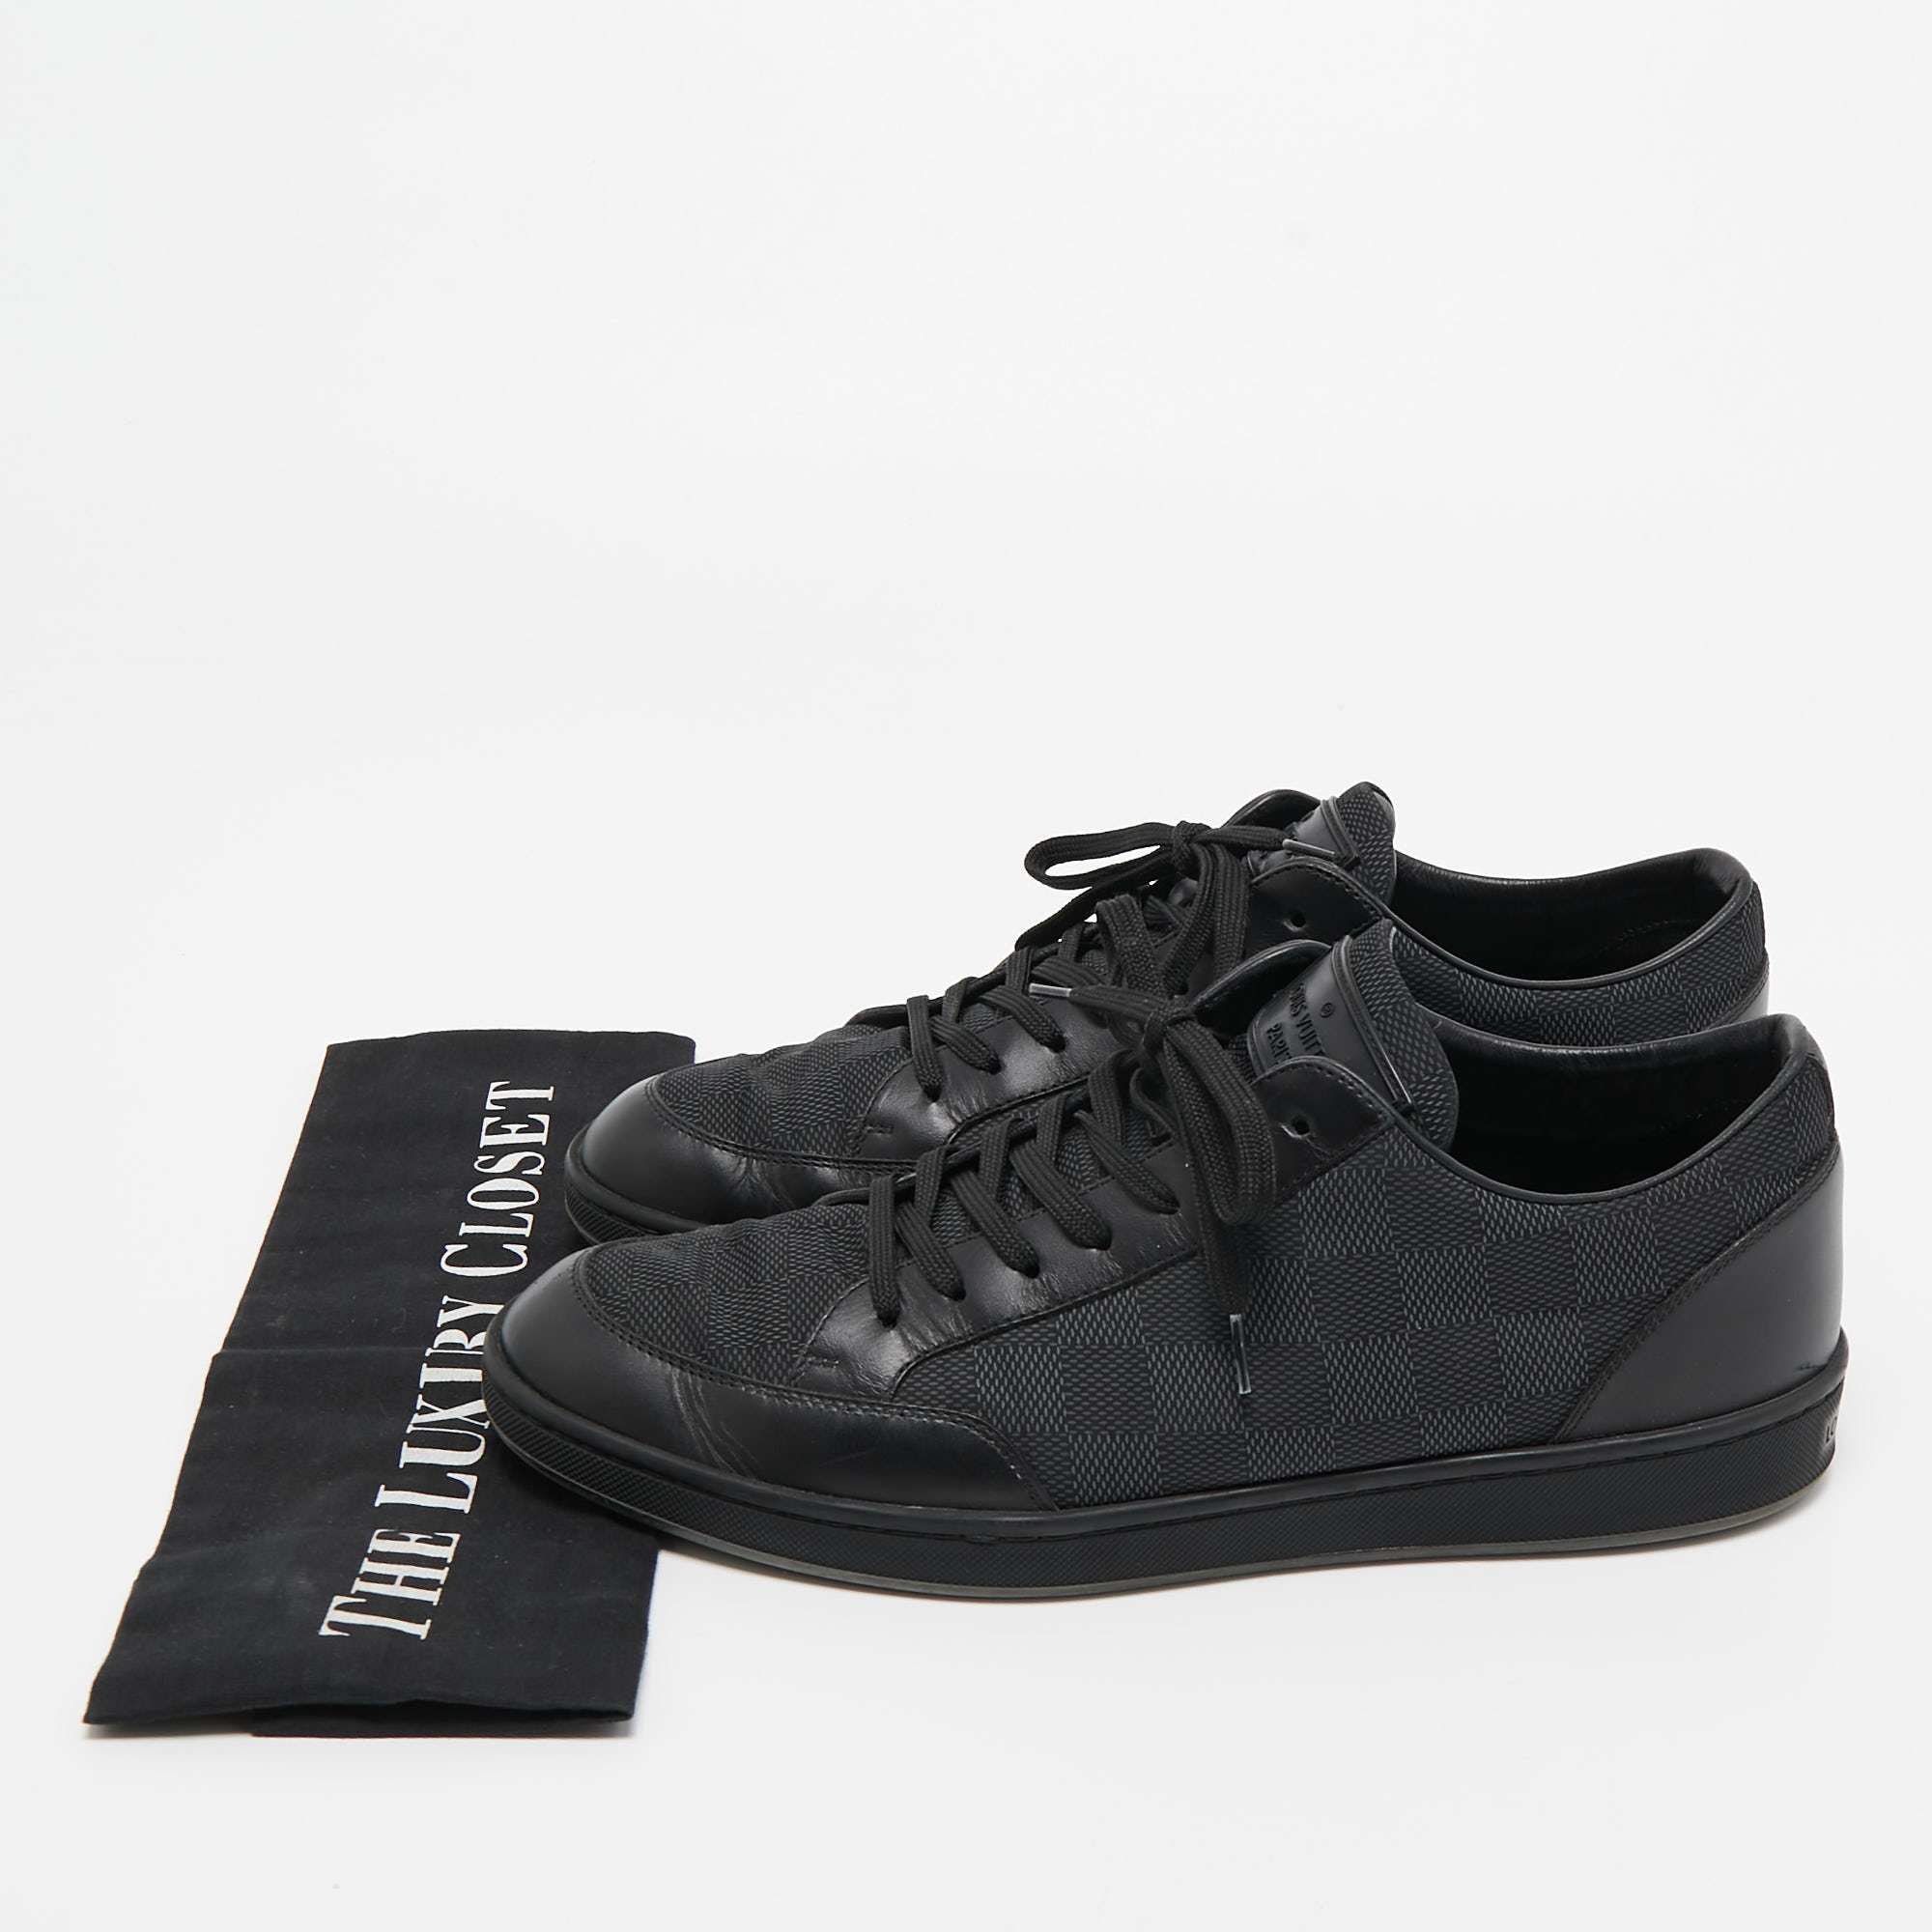 Louis Vuitton Black Leather And Nylon Low Top Sneakers Size 41